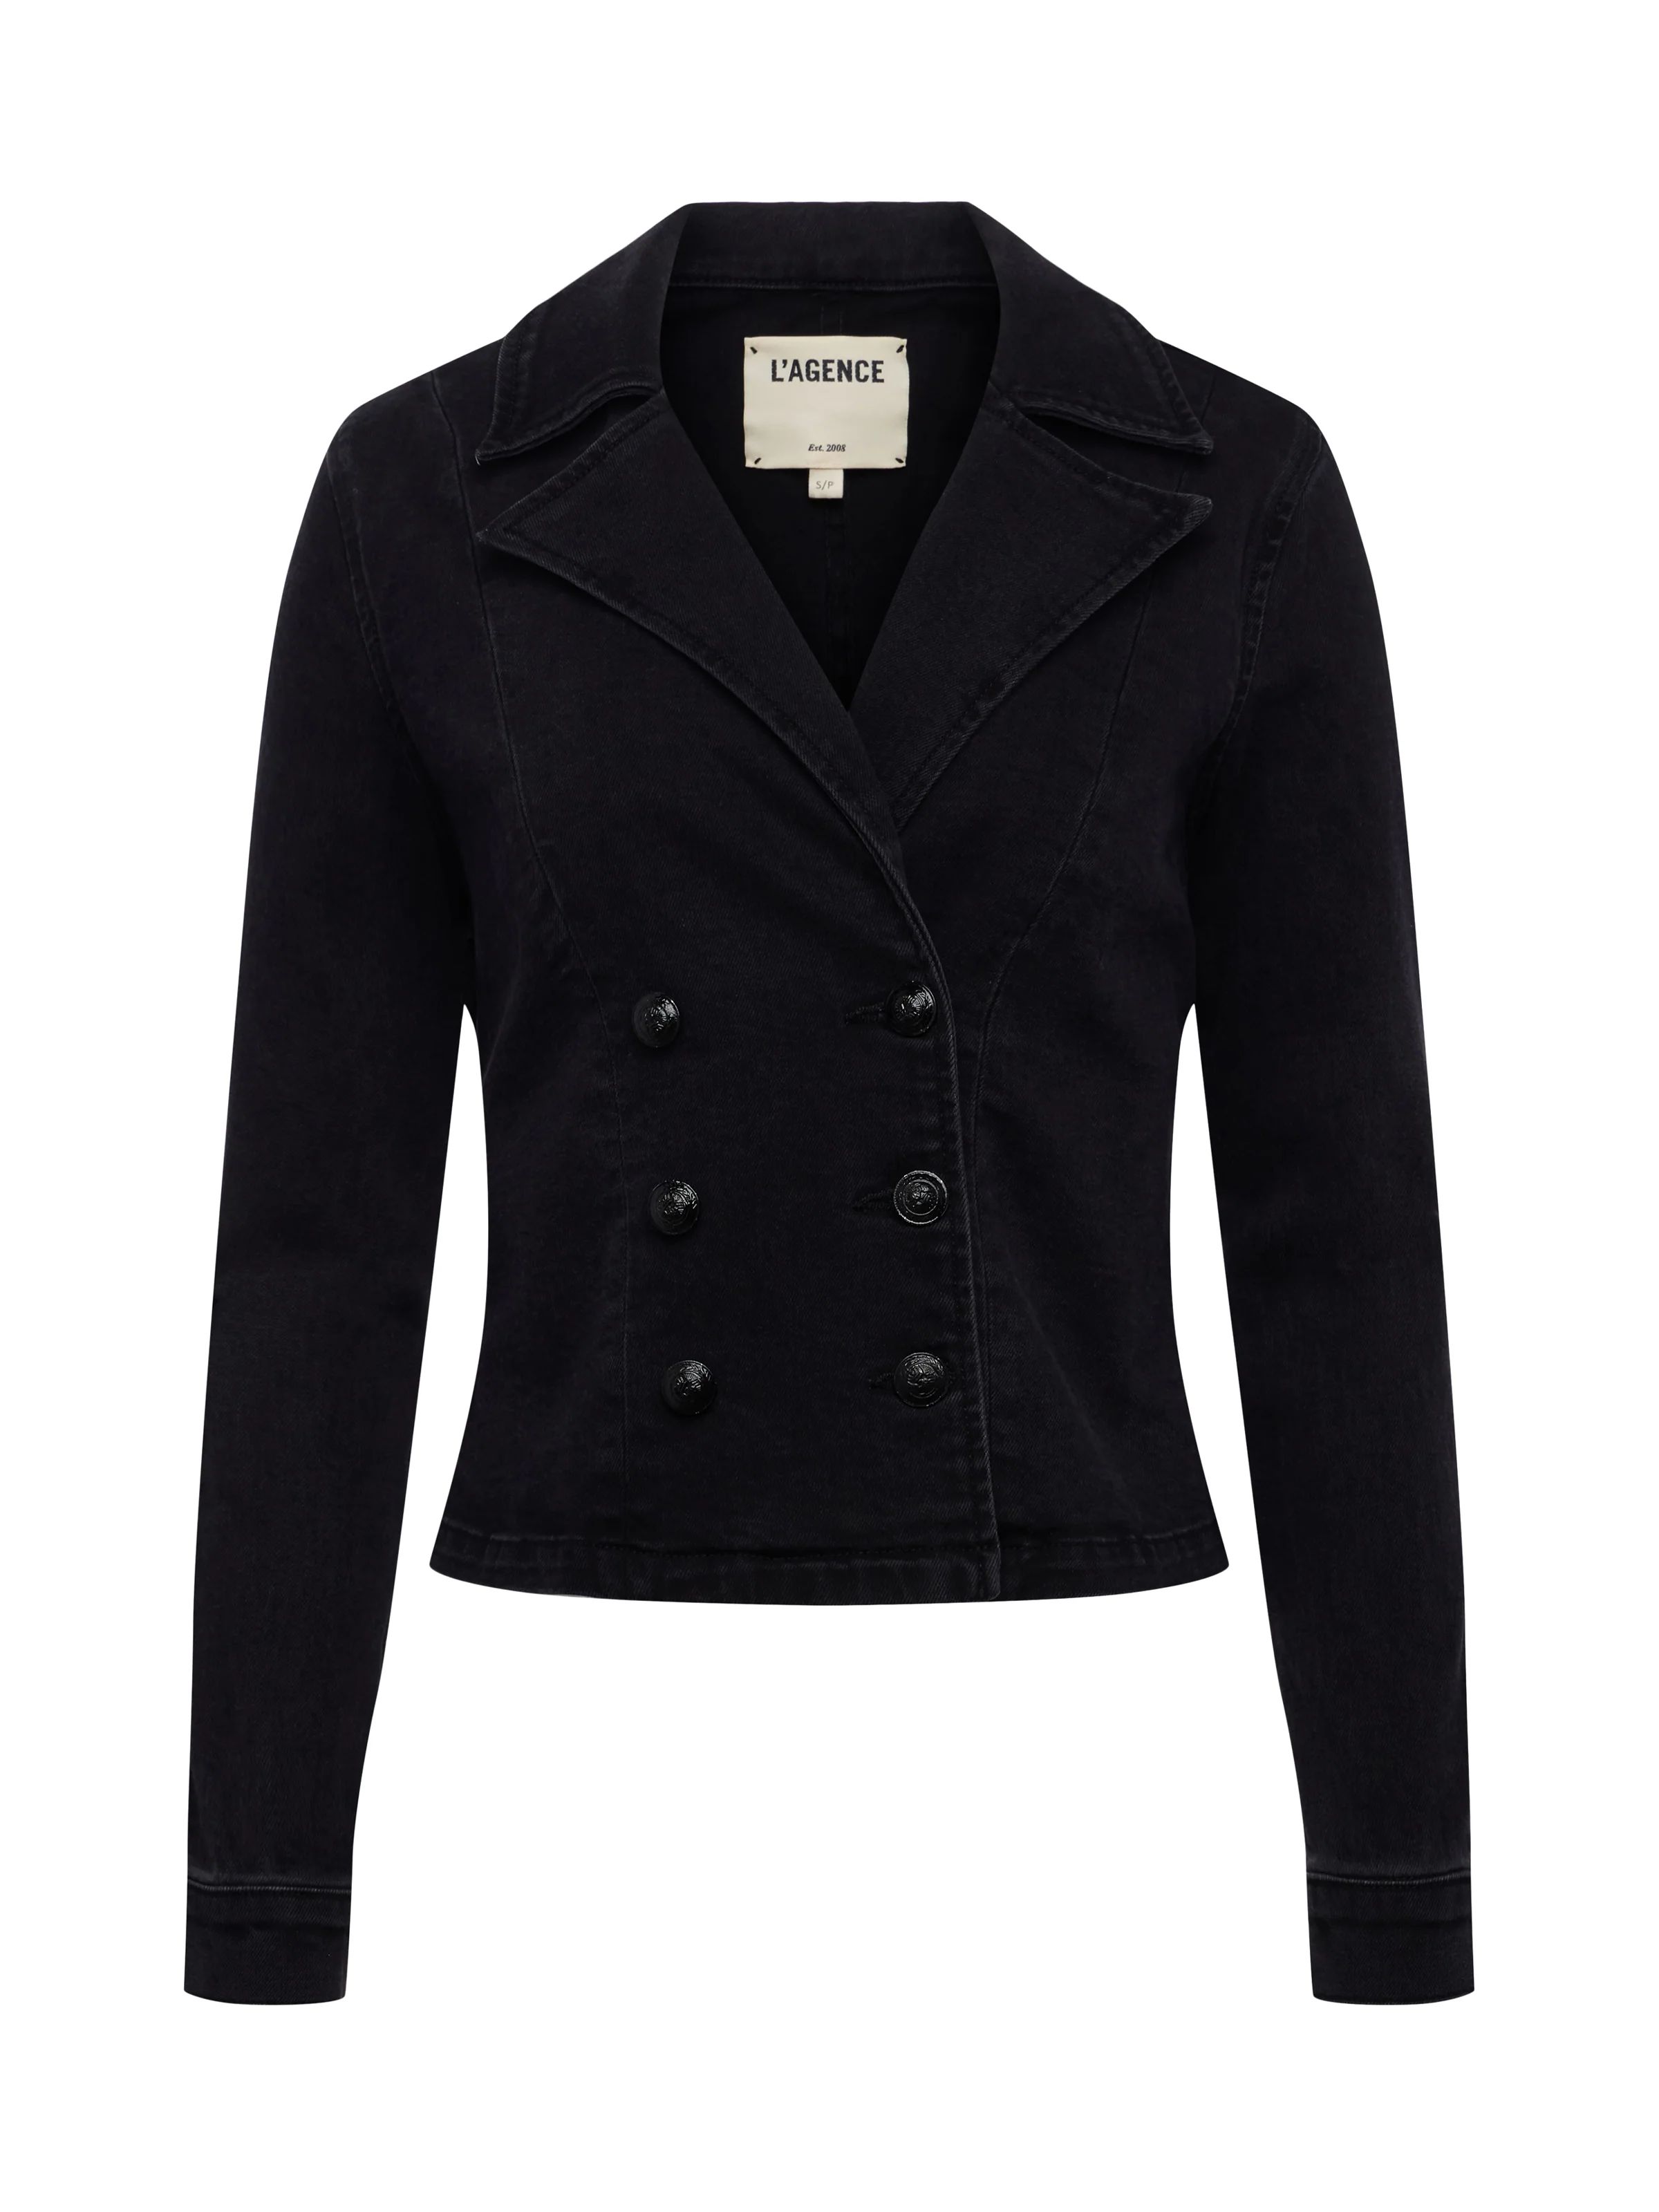 L'AGENCE Admiral Jacket In Washed Black | L'Agence